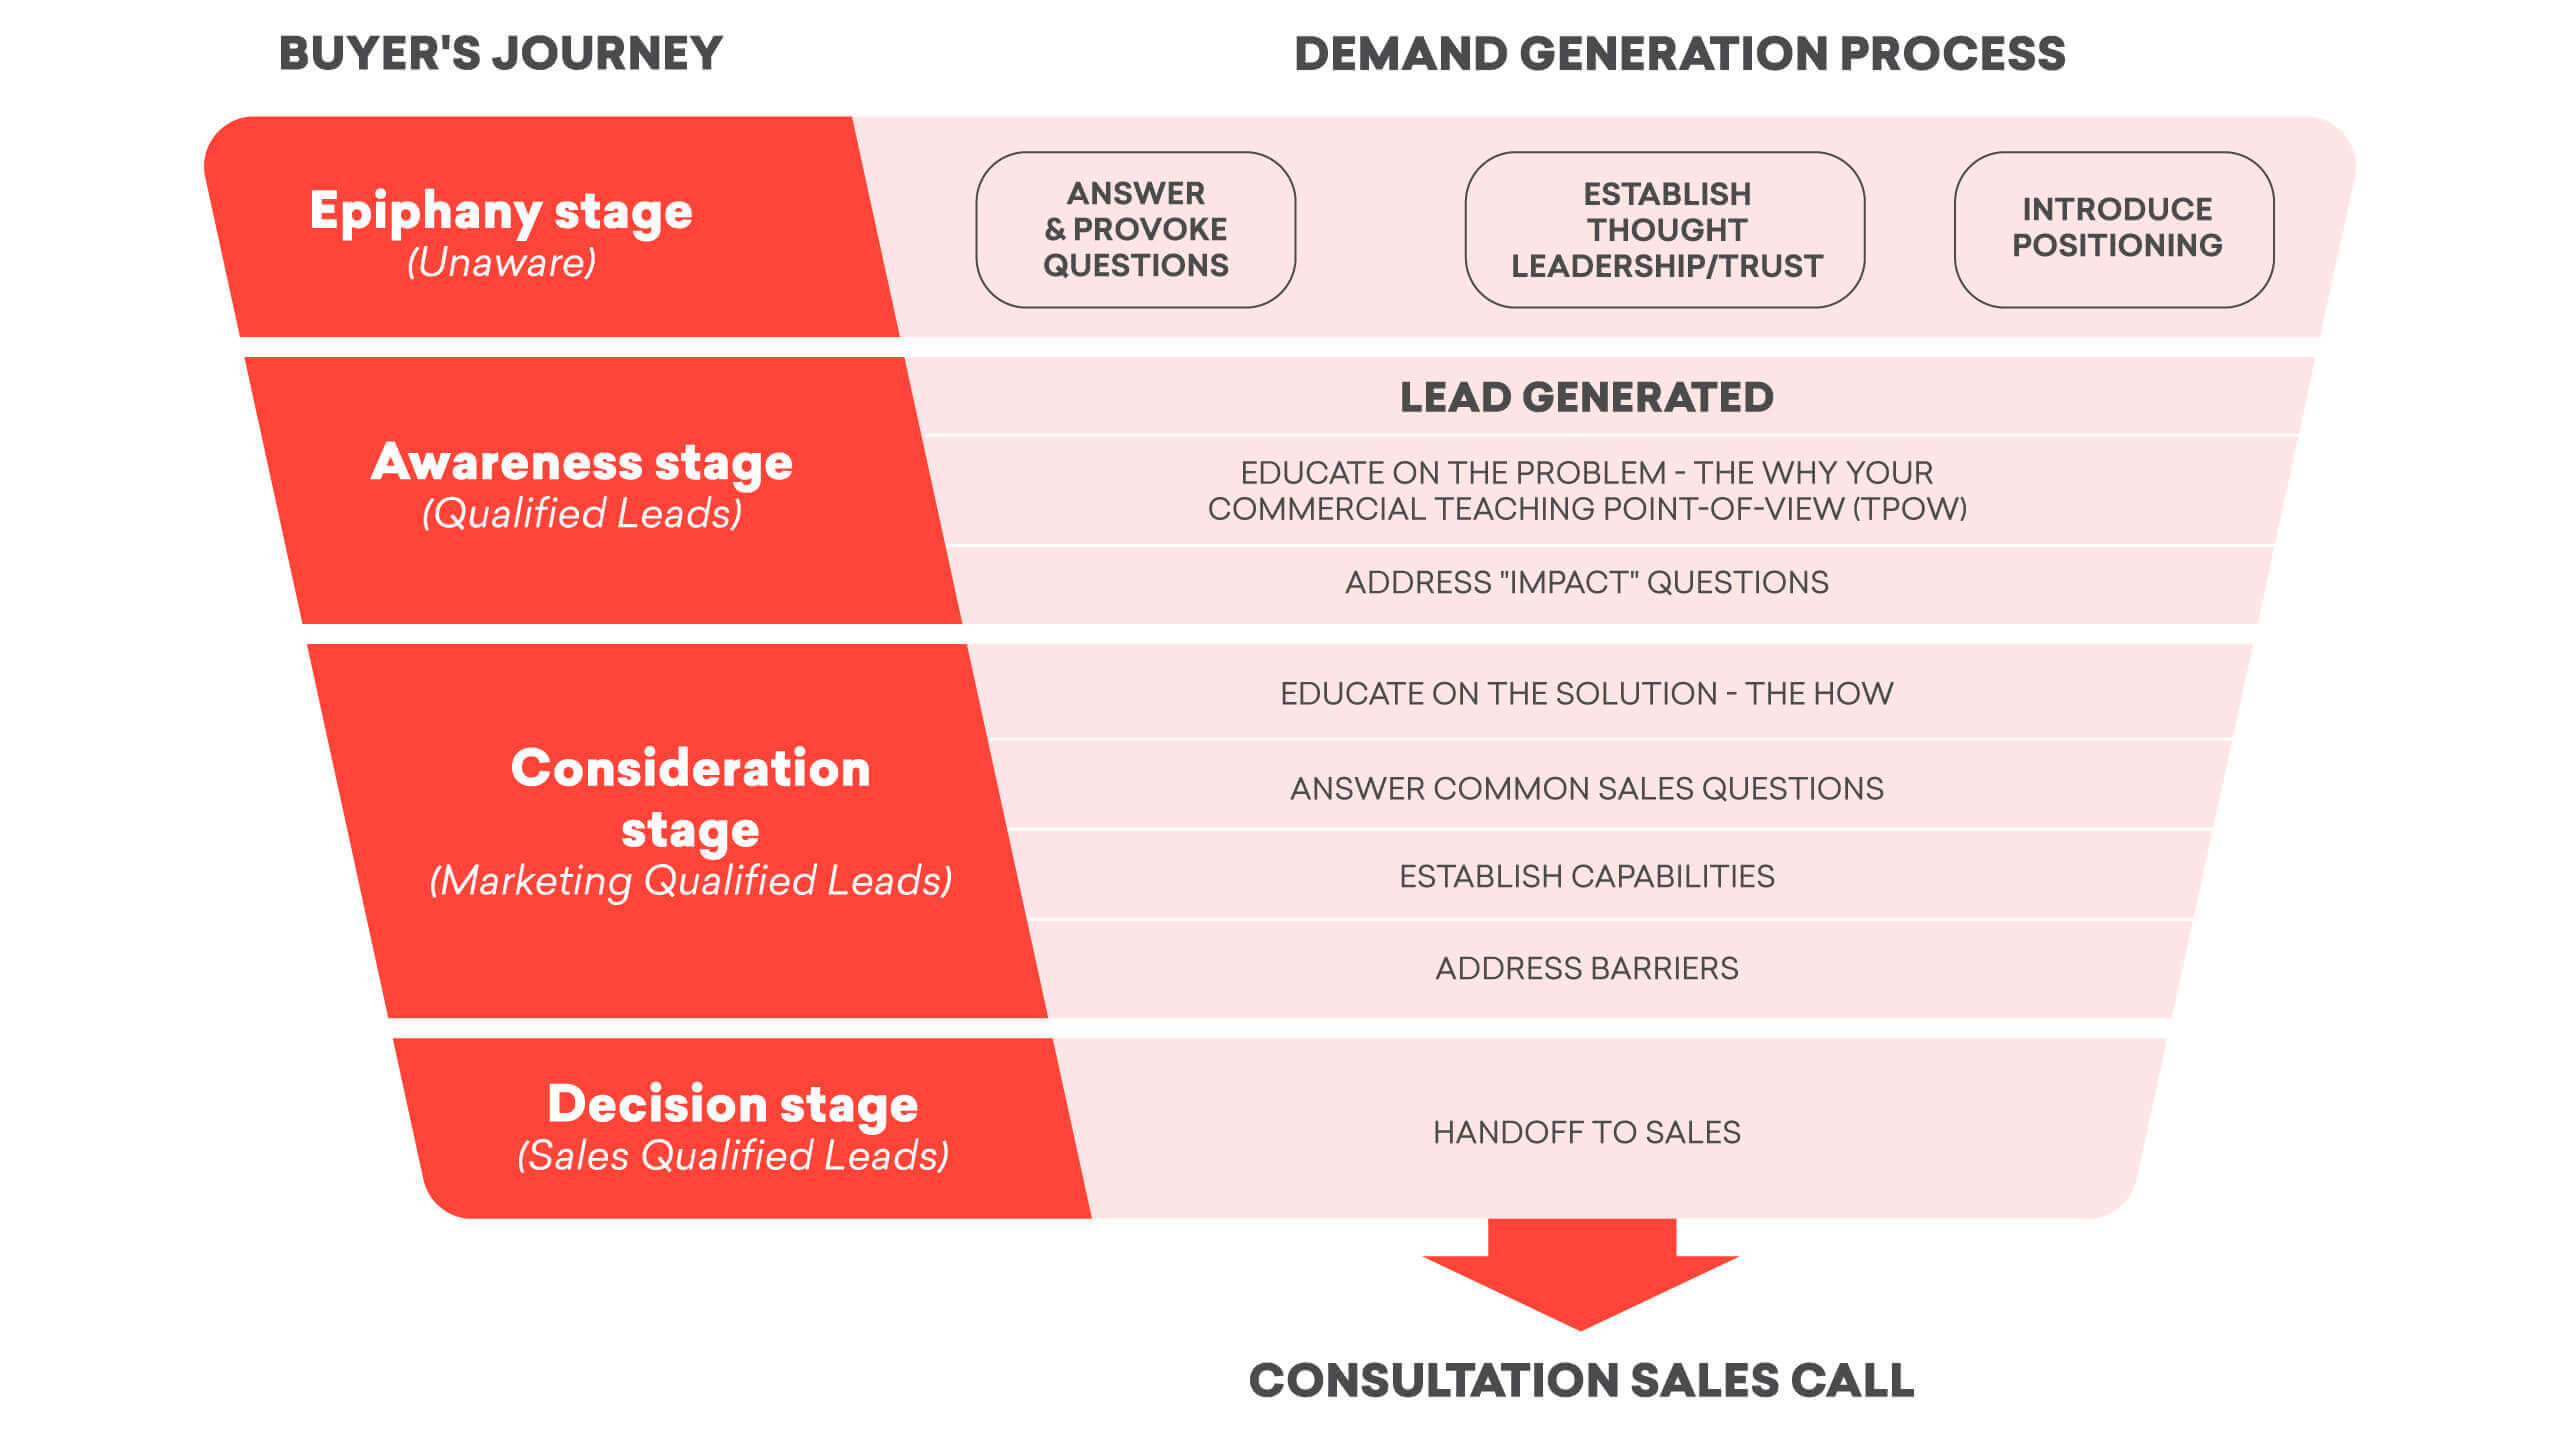 Buyer's journey and demand generation shown side-by-side